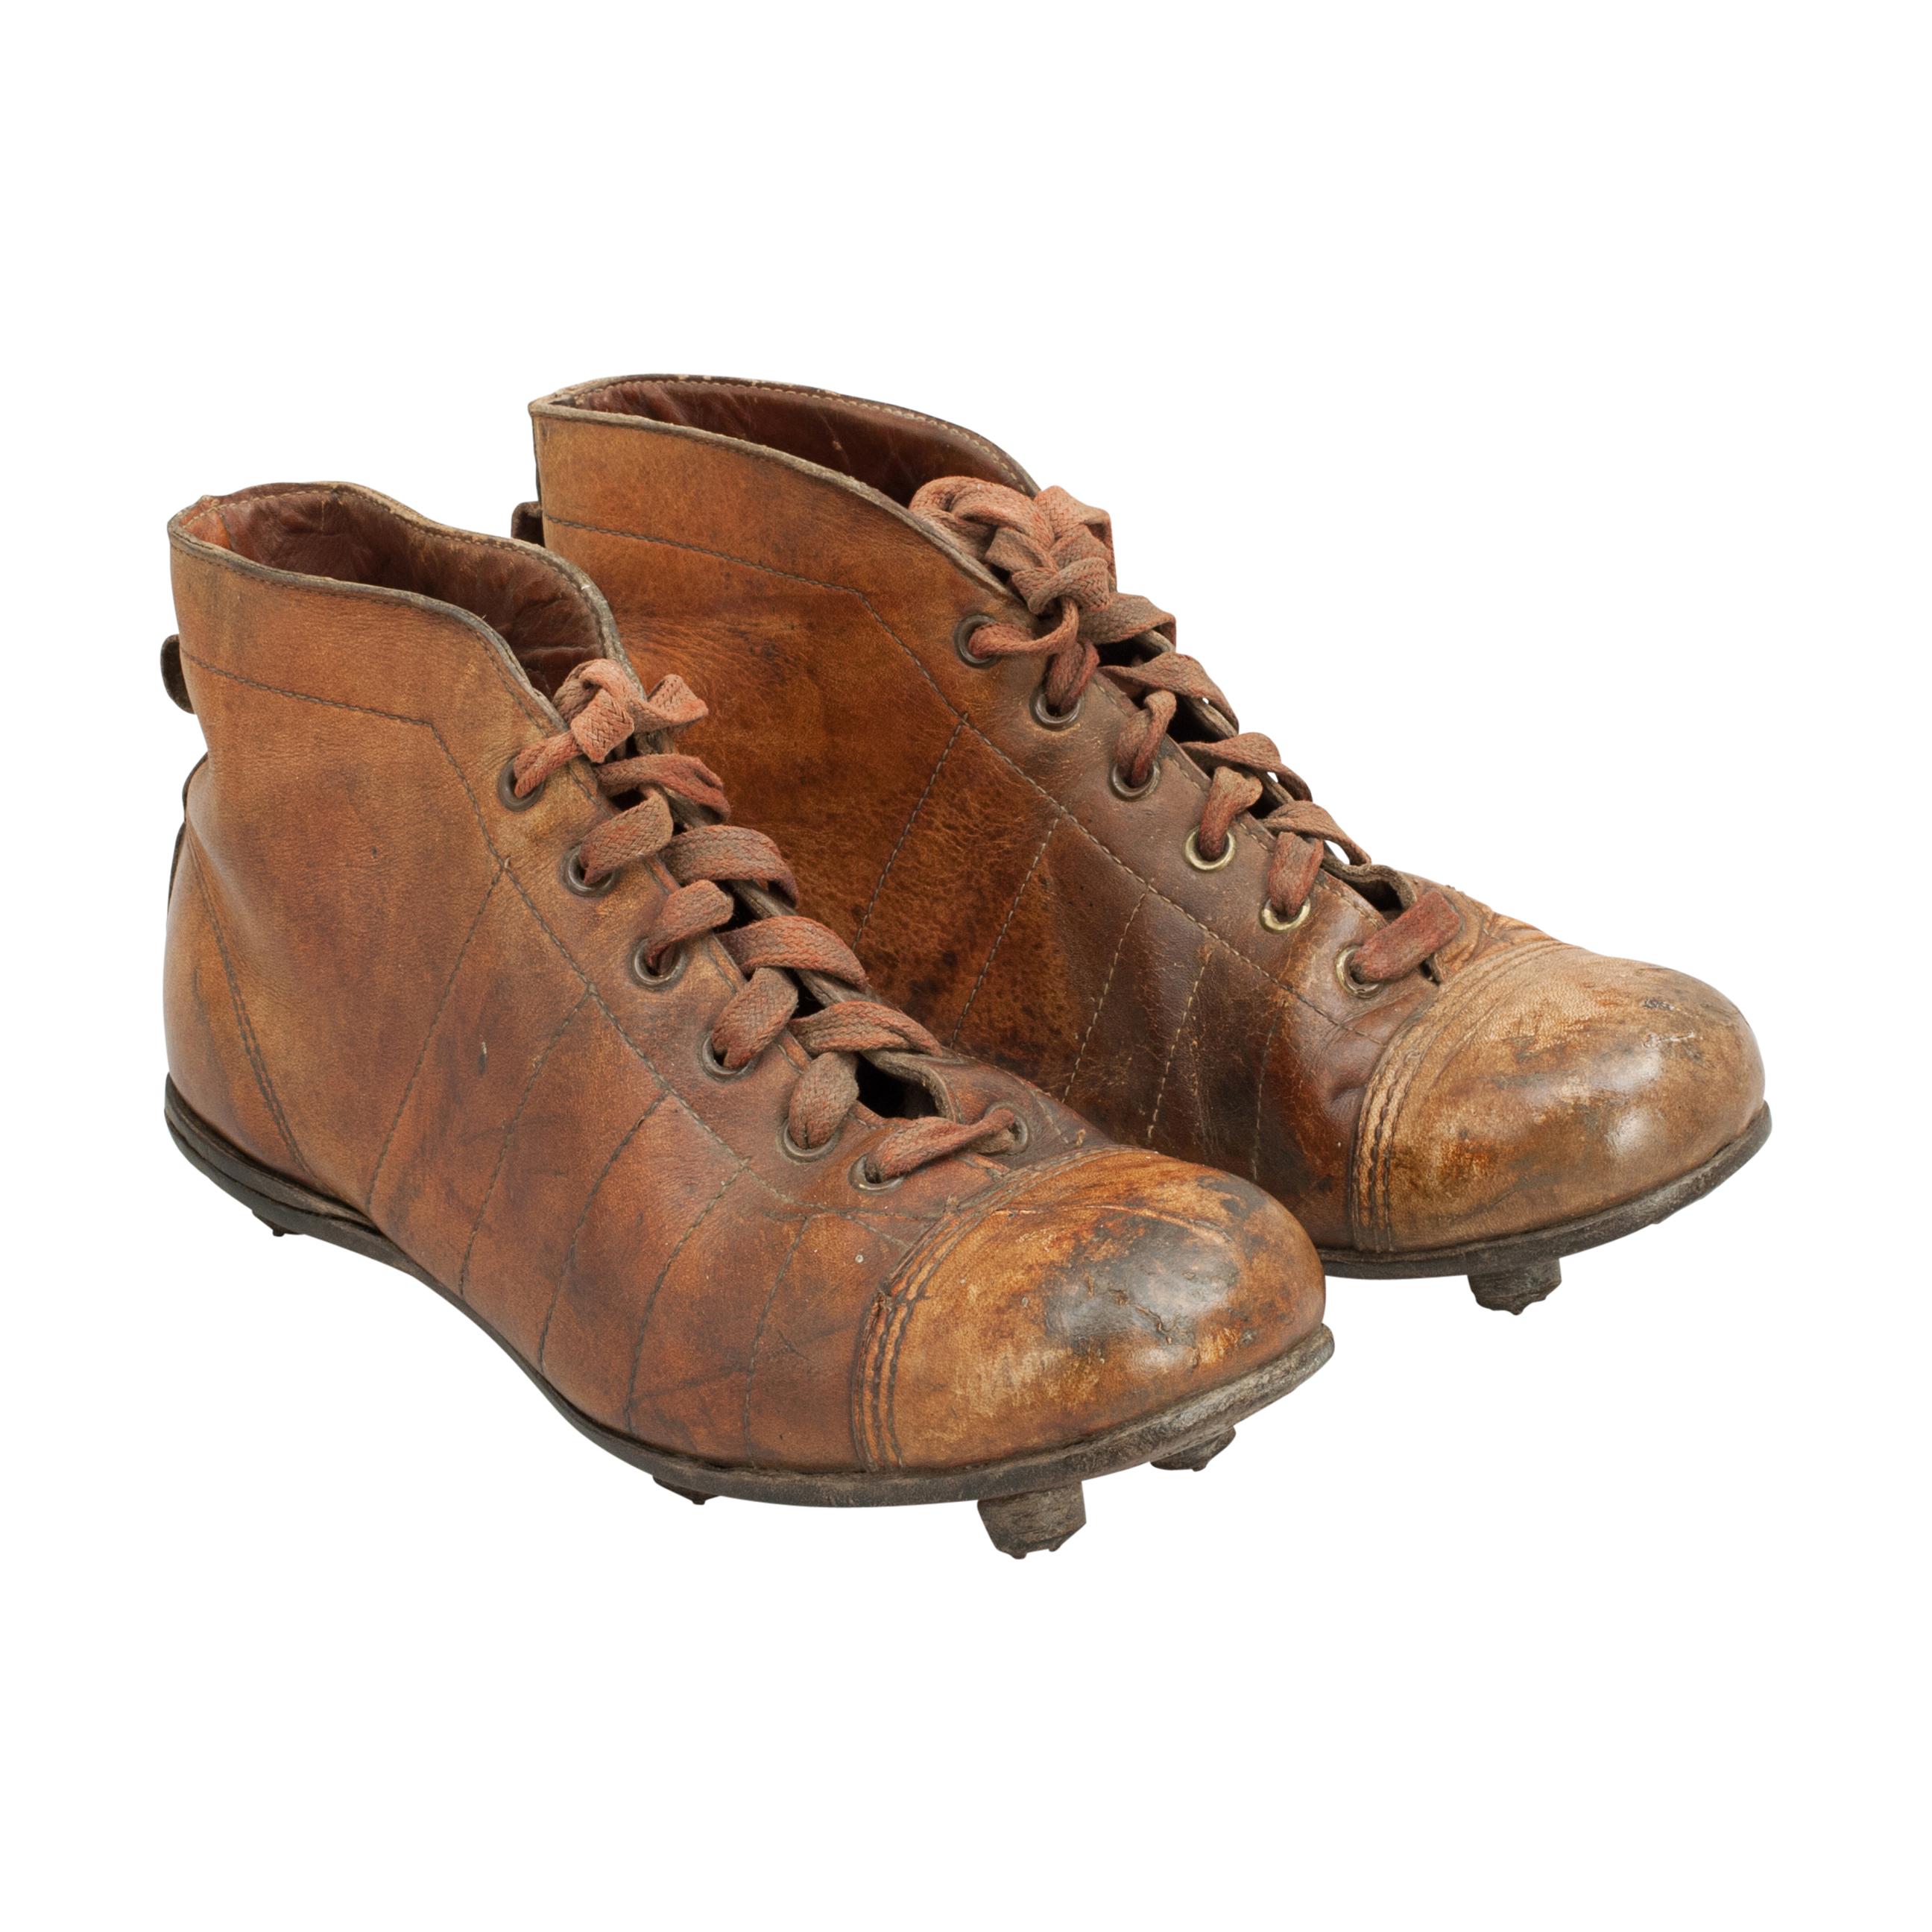 old rugby boots